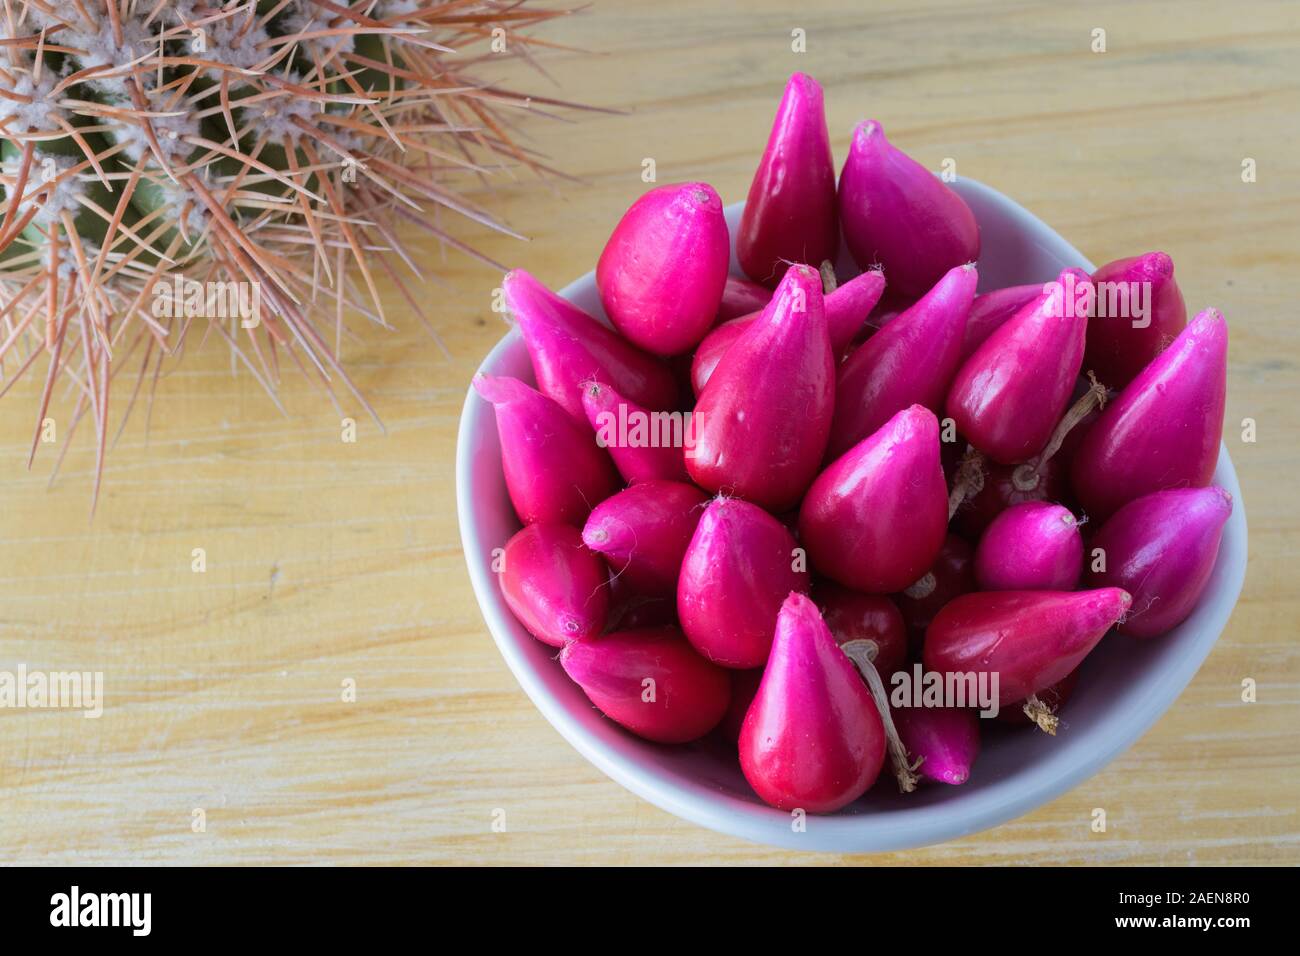 Pitiguey fruit in white bowl on wood table with Cactus Stock Photo